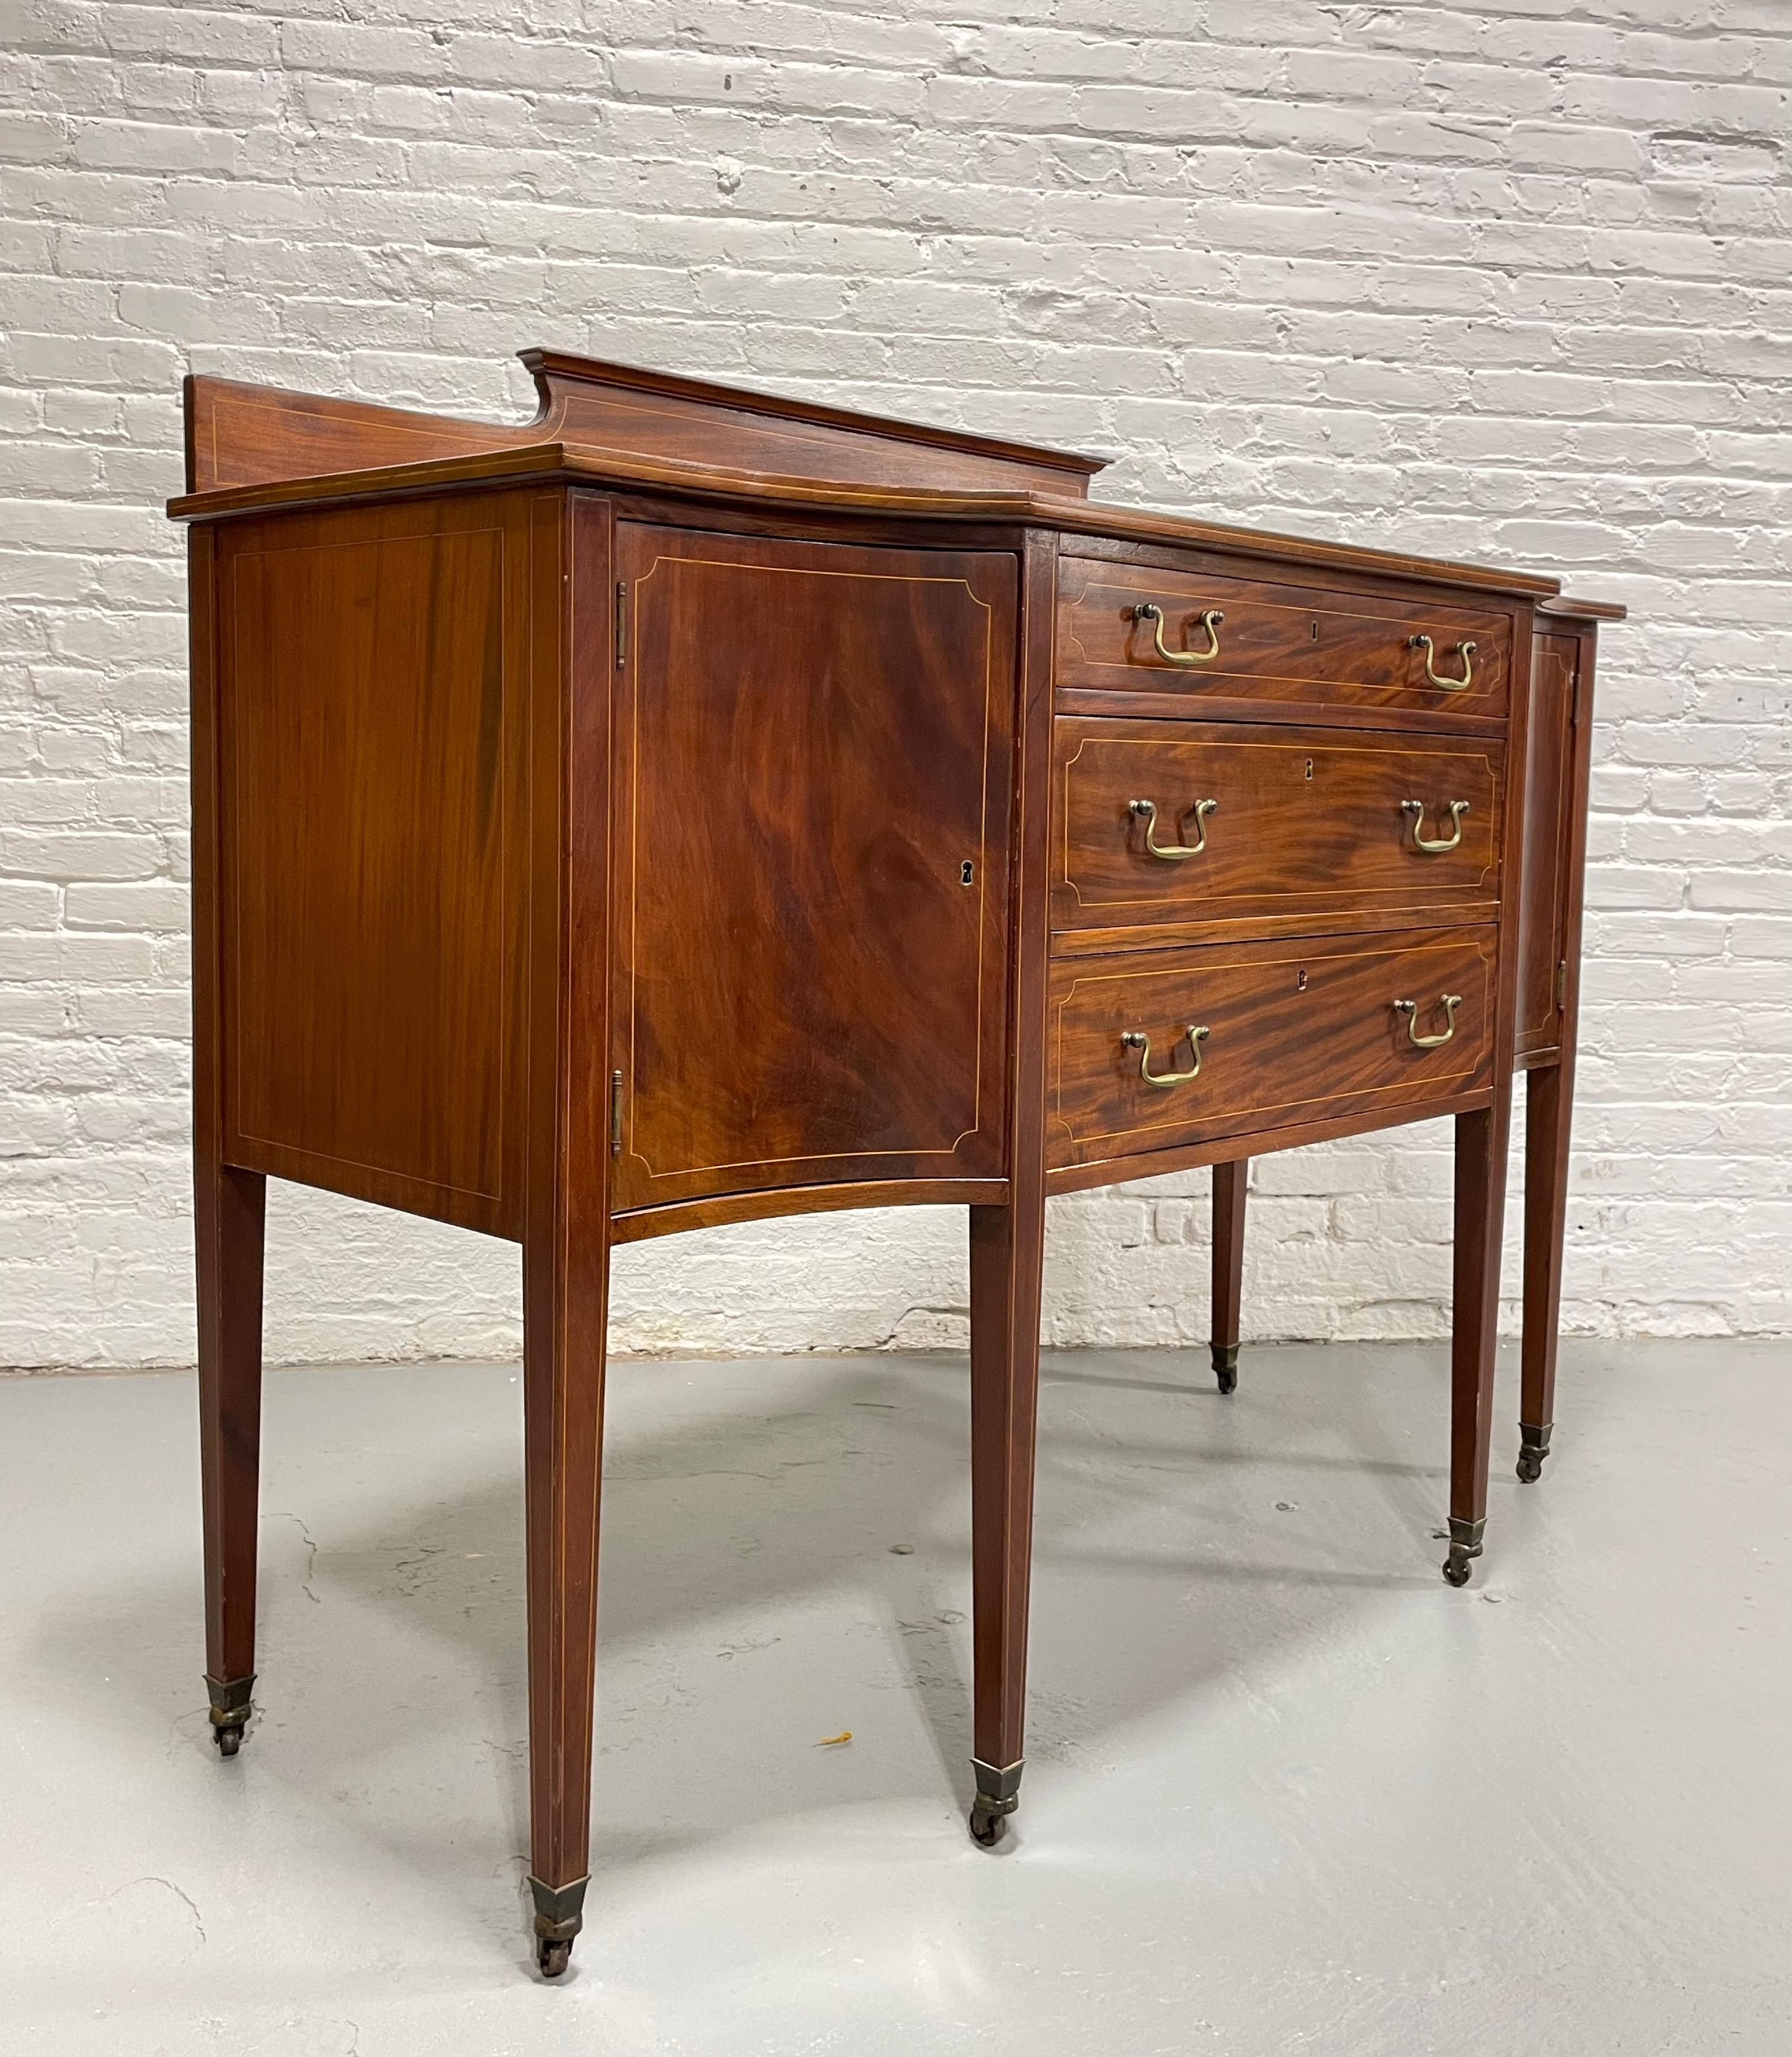 Exquisite Mahogany Sheraton style Sideboard, c. 1910. Stunning flame mahogany wood grains.  This cabinet is raised on 6 square tapered legs with spade feet and castors at the ends. Three deep dovetailed drawers along the front with brass handpulls